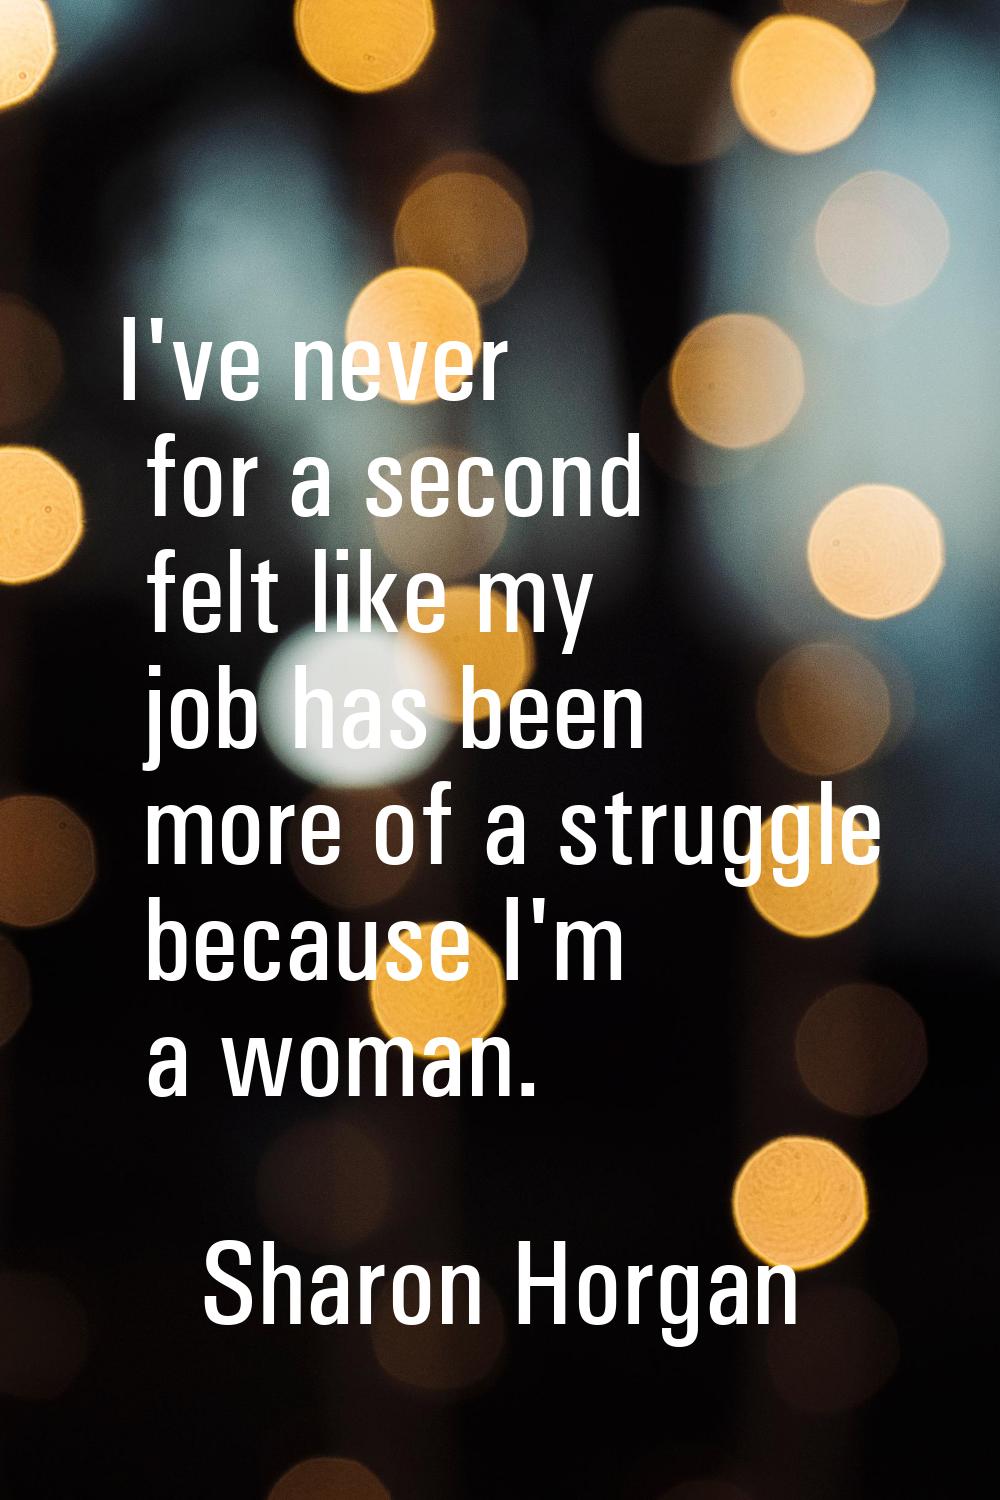 I've never for a second felt like my job has been more of a struggle because I'm a woman.